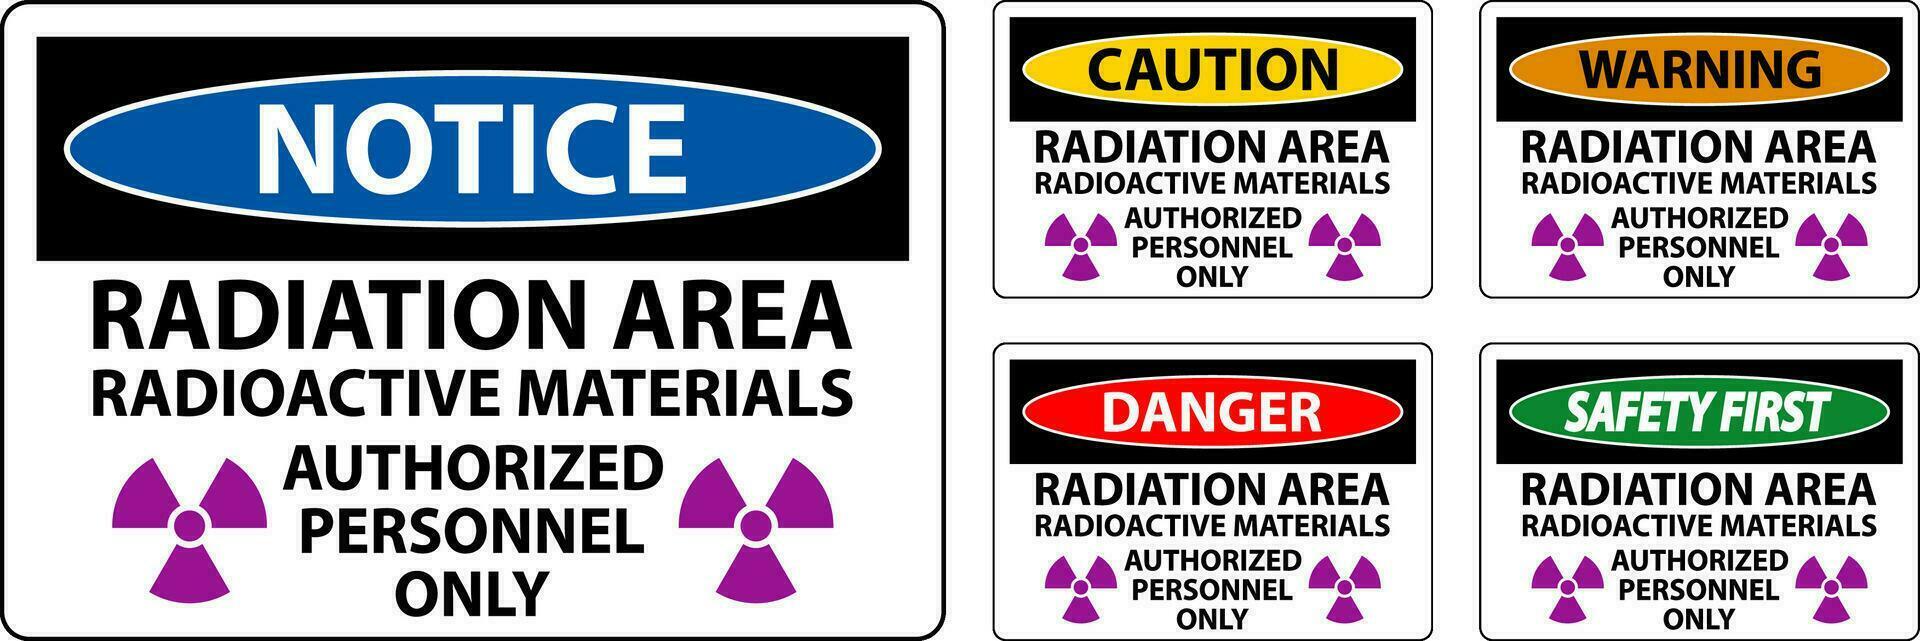 Radiation Warning Sign Caution Radiation Area - Radioactive Materials, Authorized Personnel Only vector